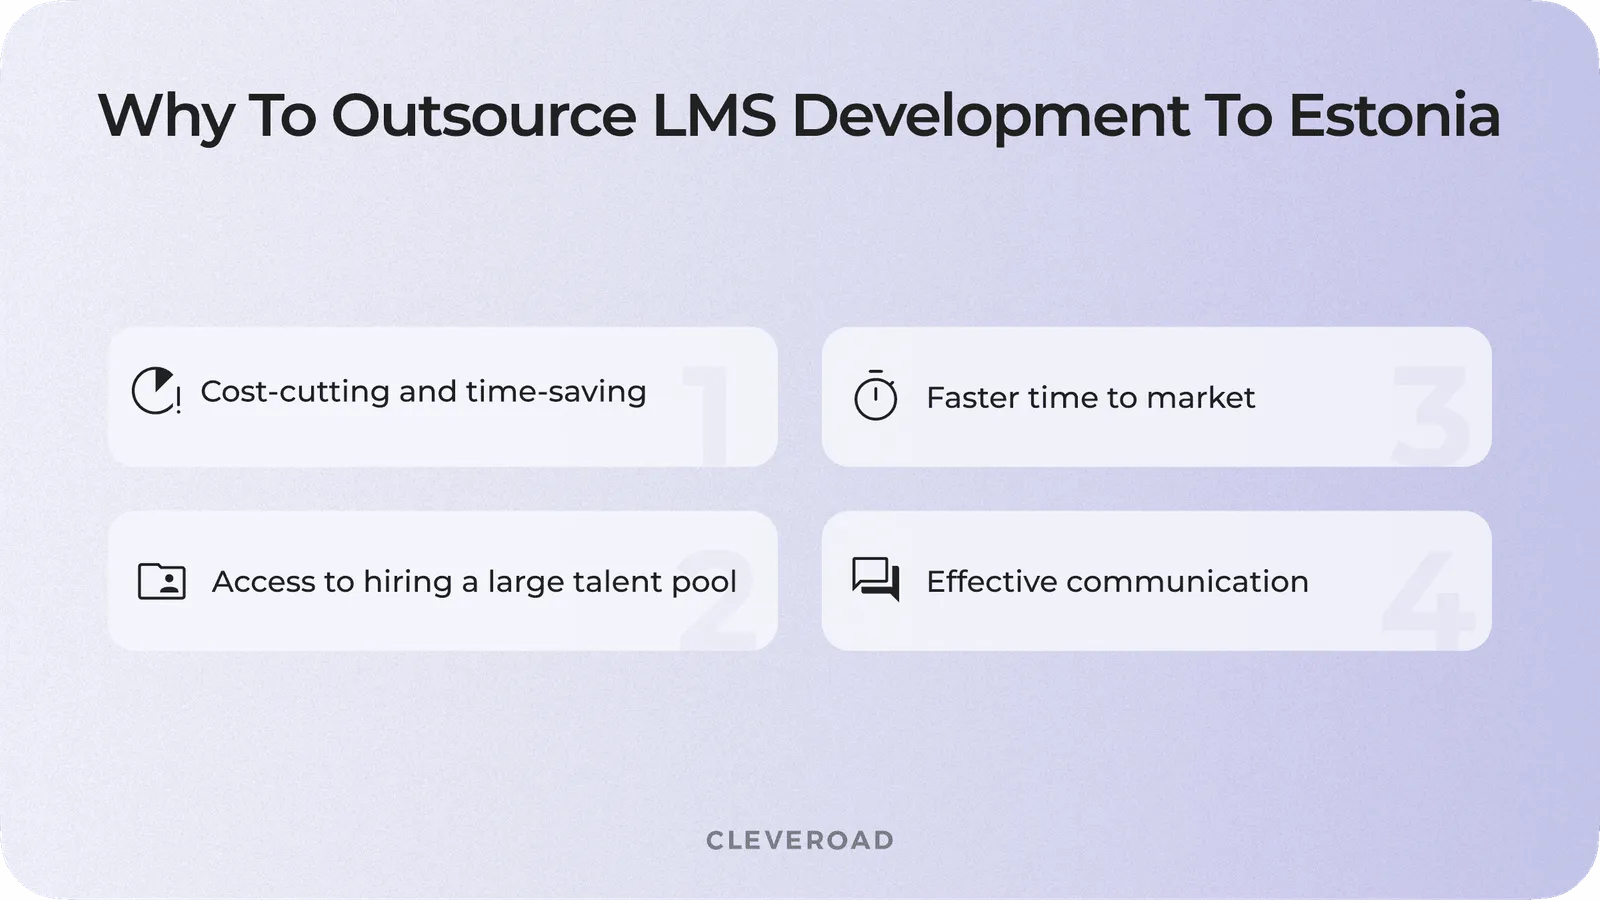 Top reasons to outsource software development